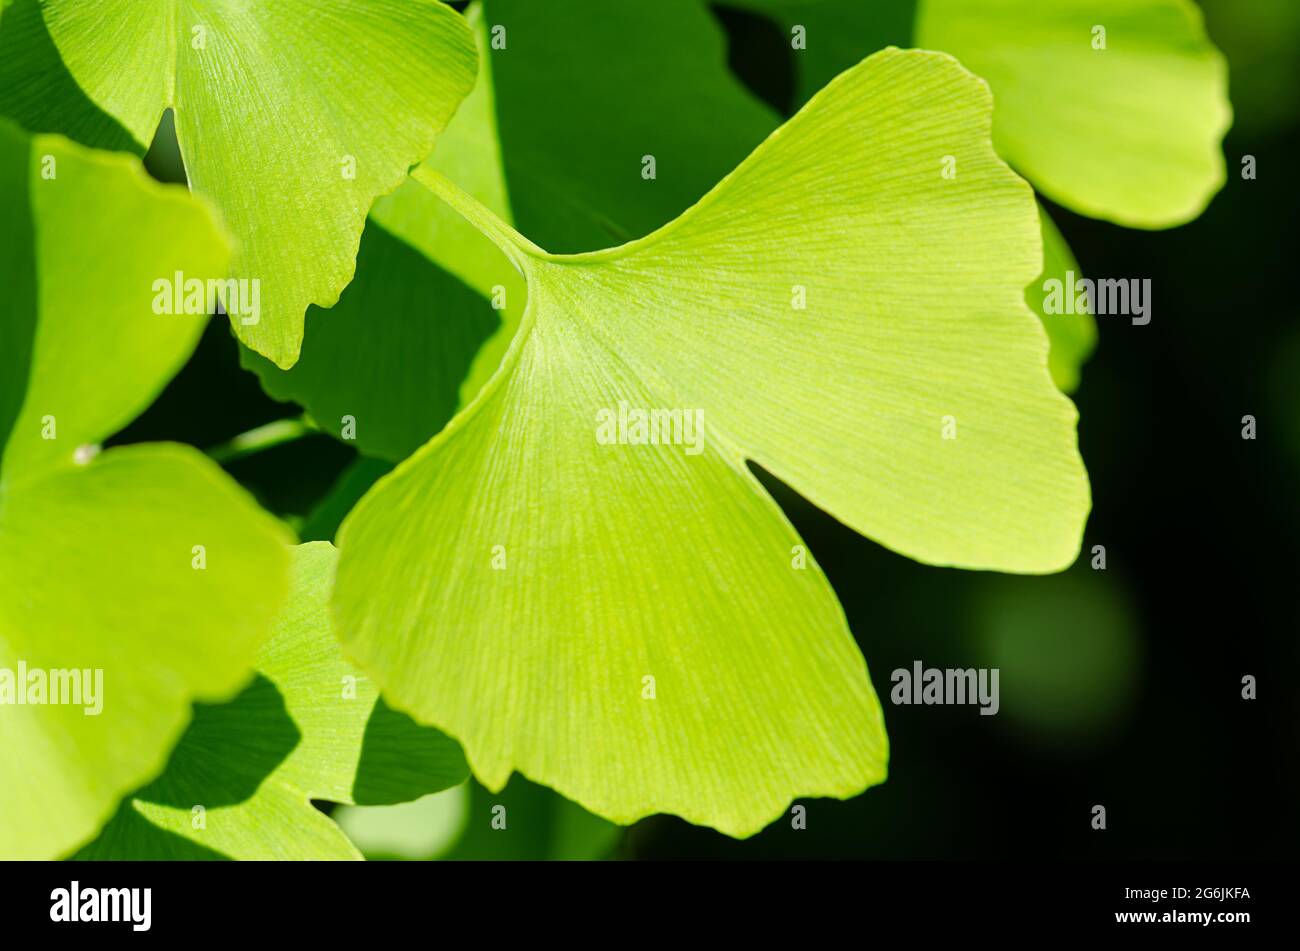 Green ginkgo leaf. Ginkgo biloba, also gingko or maidenhair tree, the official tree of the Japanese capital of Tokyo, and the symbol of Tokyo. Stock Photo